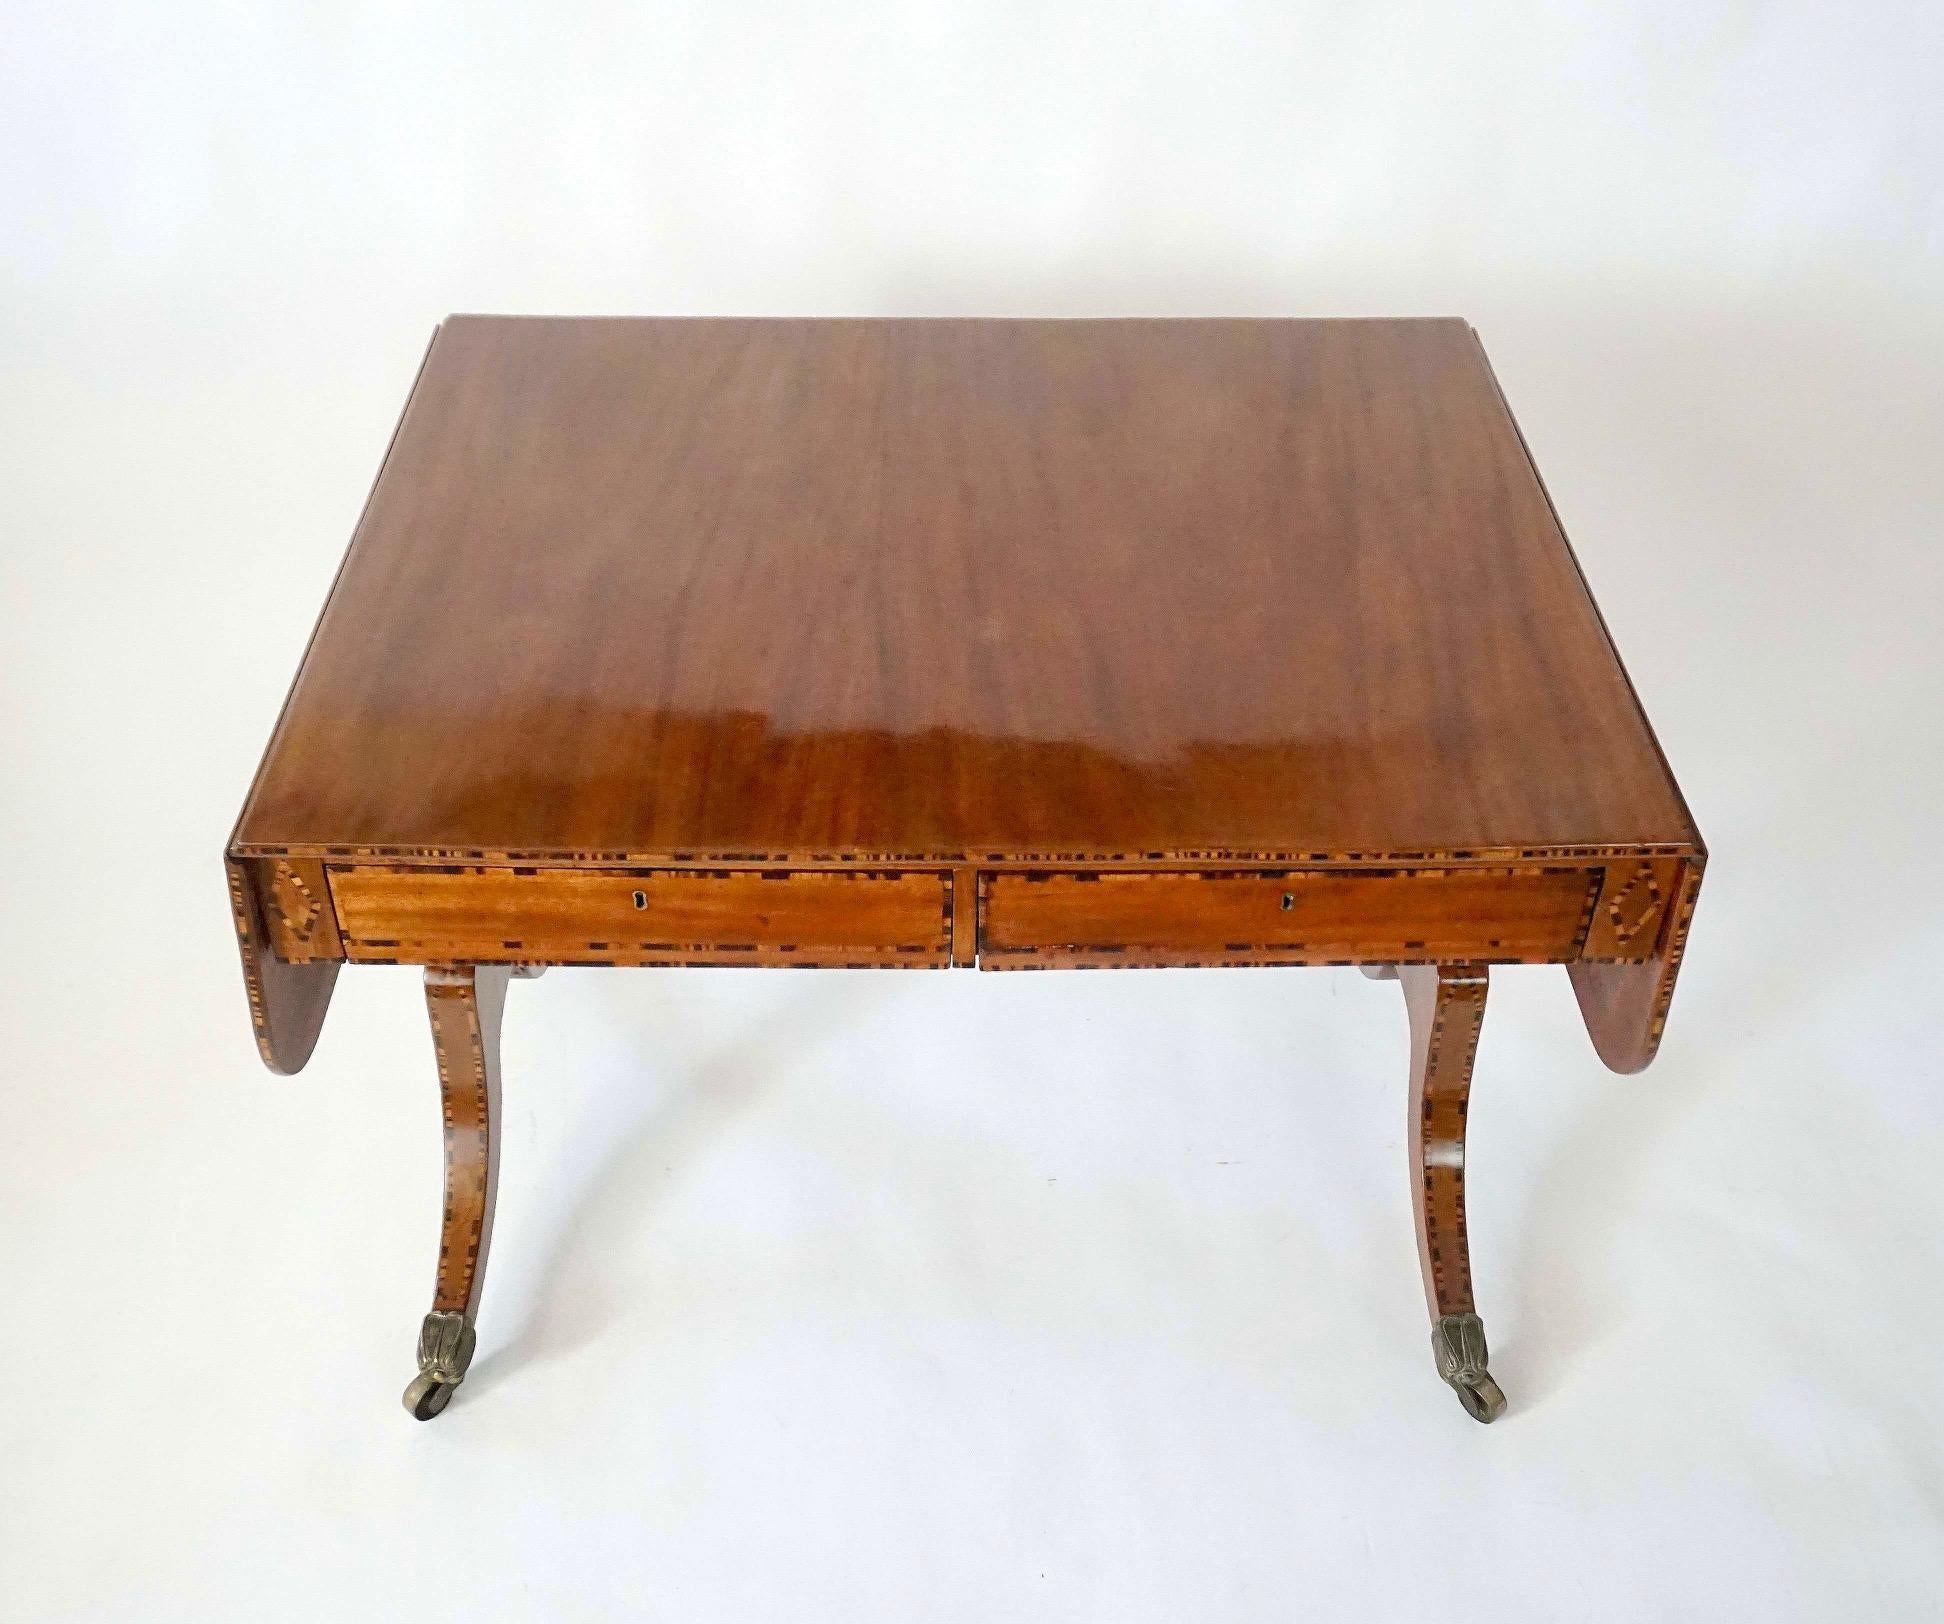 Hand-Crafted Calamander Inlaid Mahogany Sofa Table by William Wilkinson, London, circa 1820 For Sale